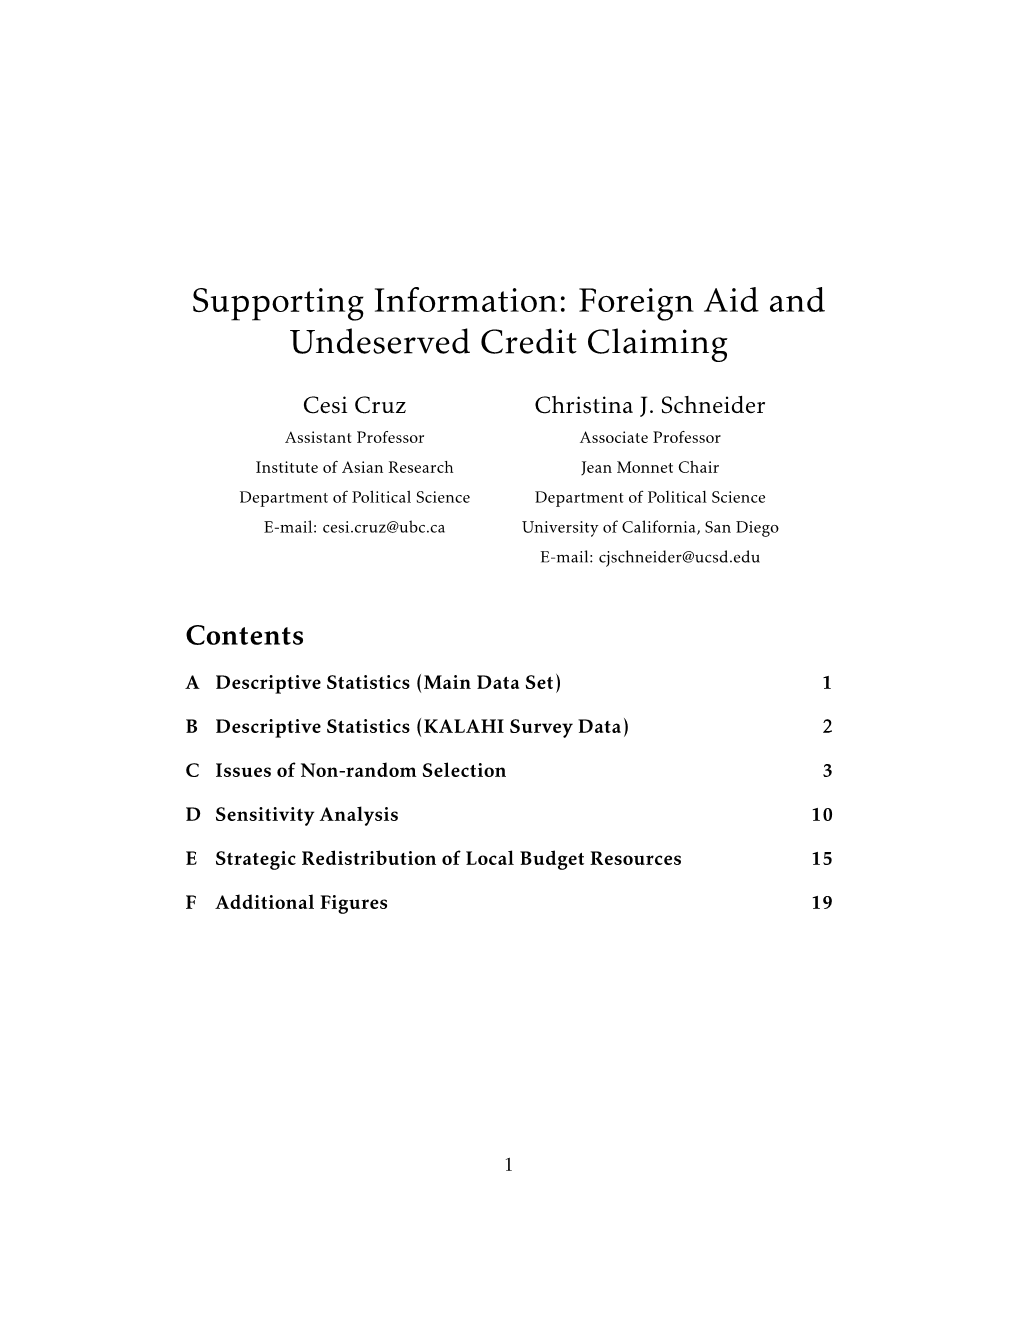 Supporting Information: Foreign Aid and Undeserved Credit Claiming